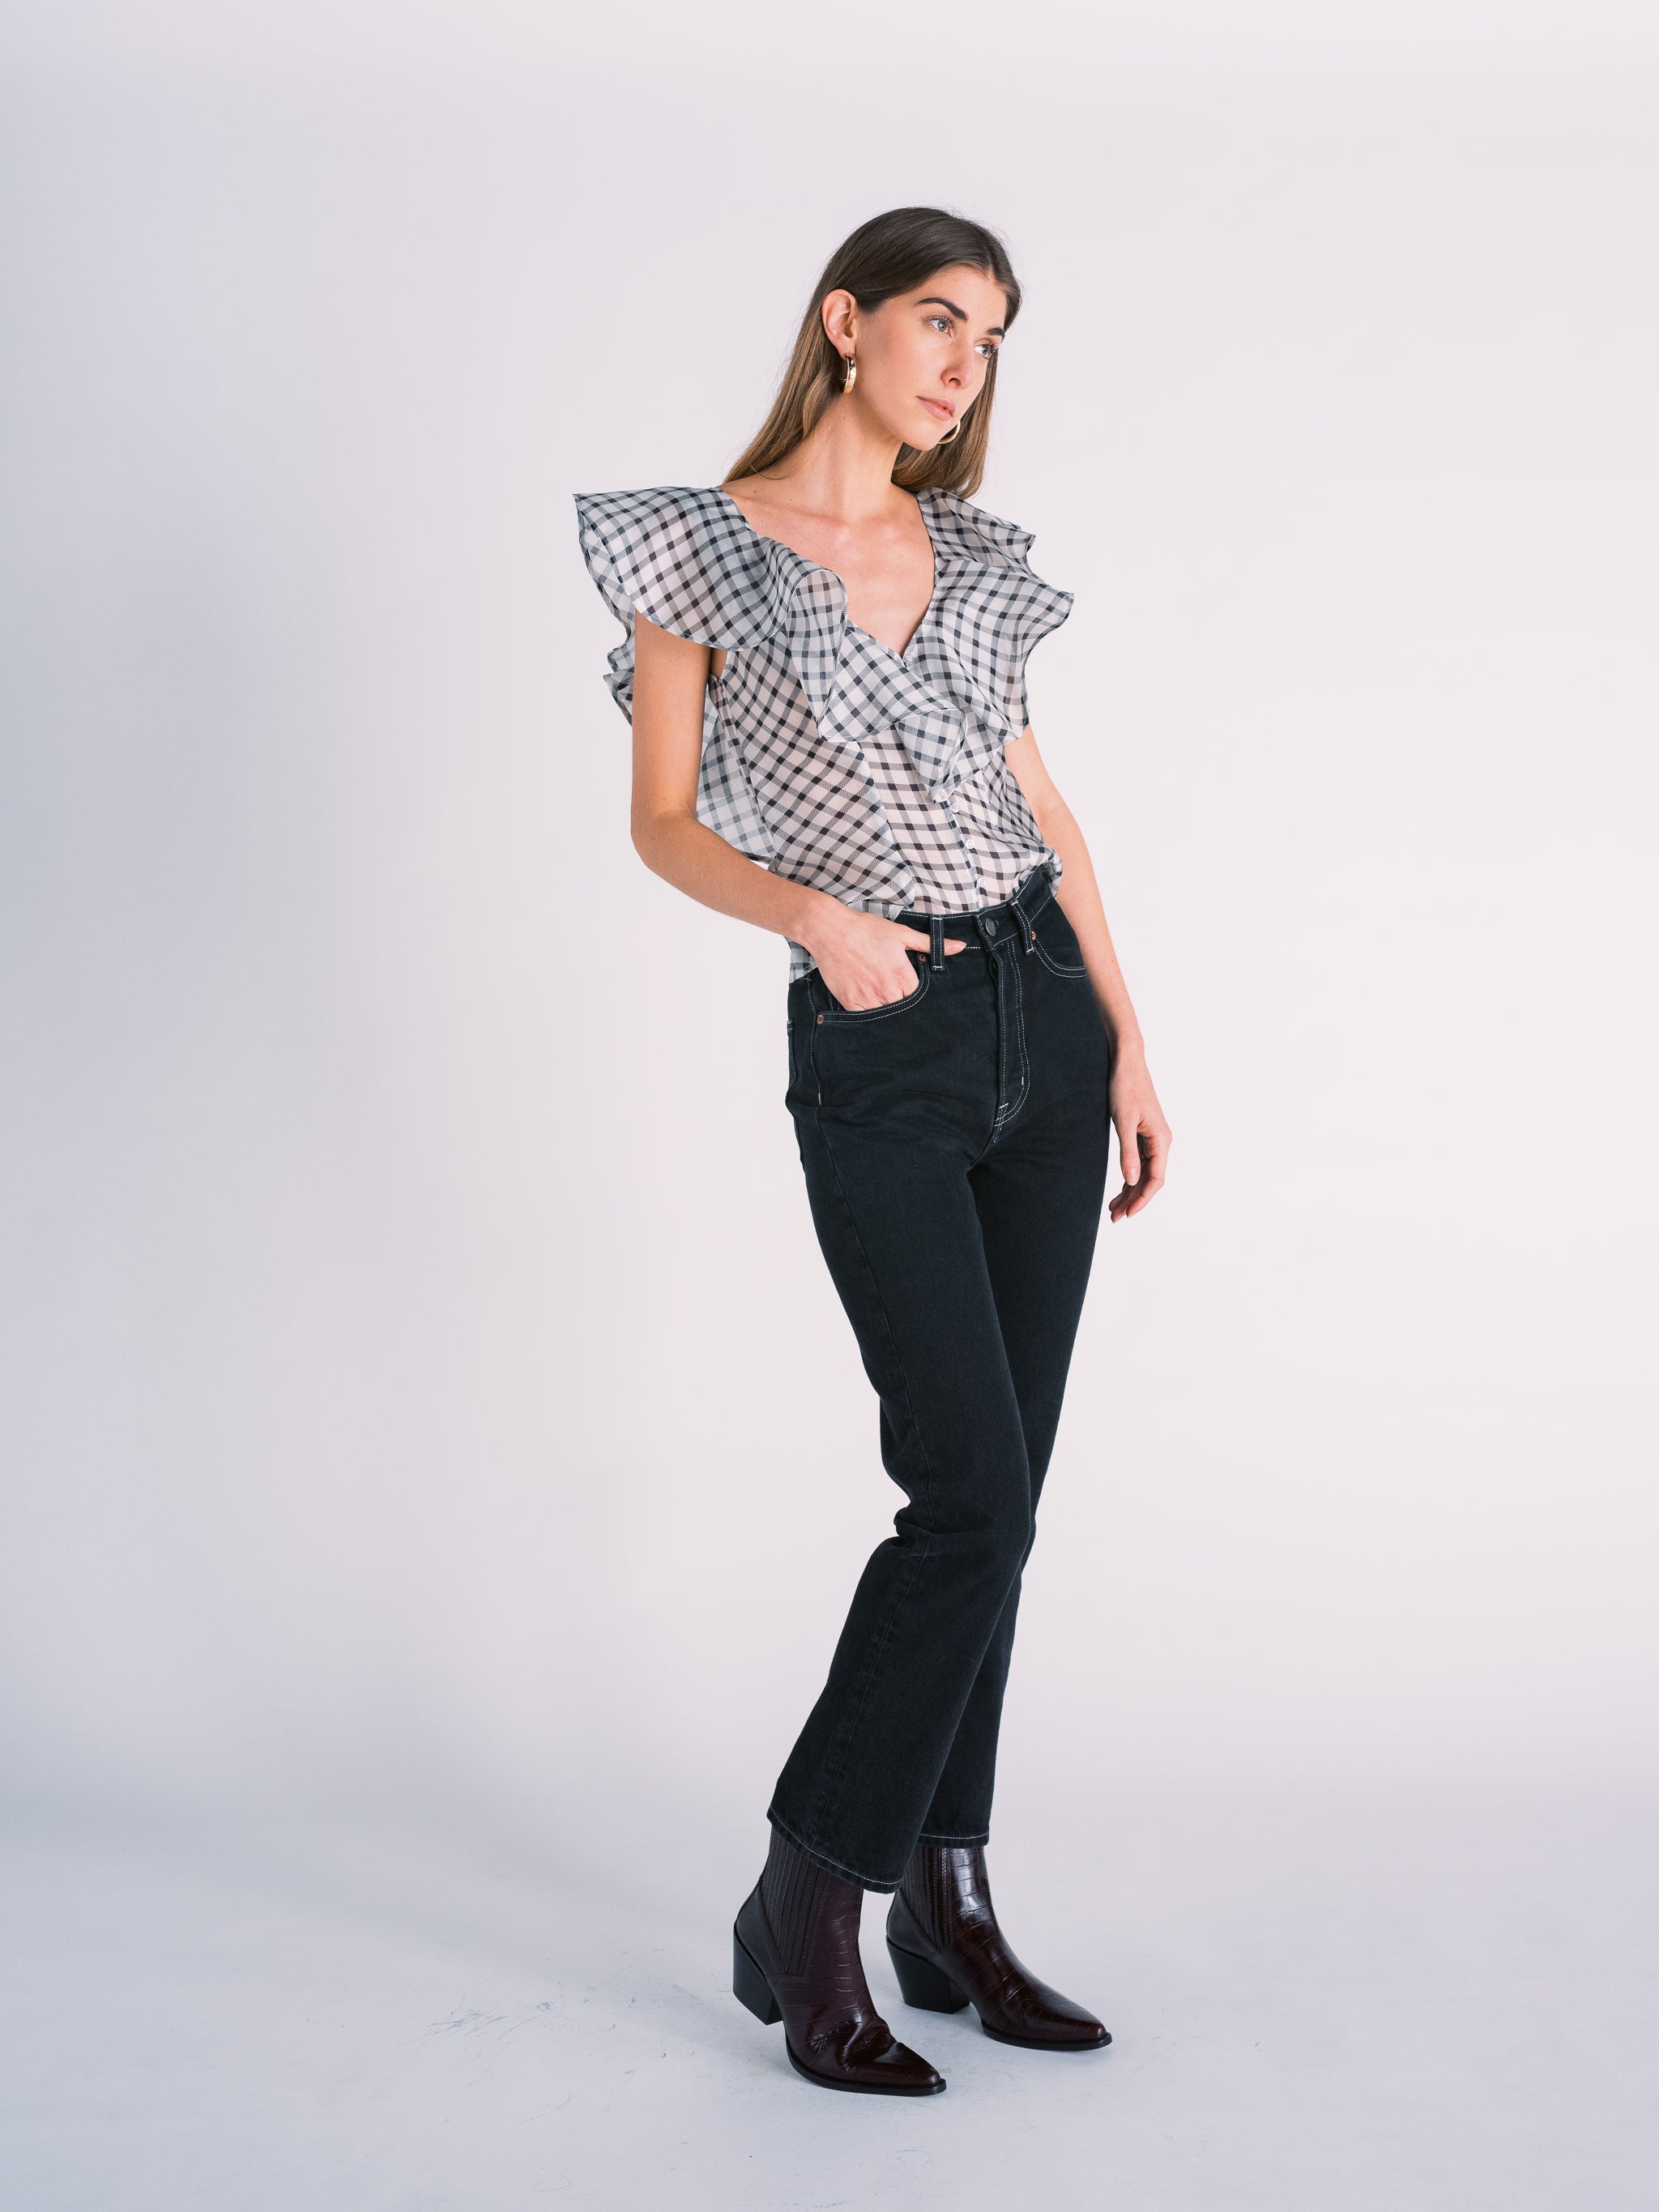 Silk Ruffle Blouse in Black and White Plaid